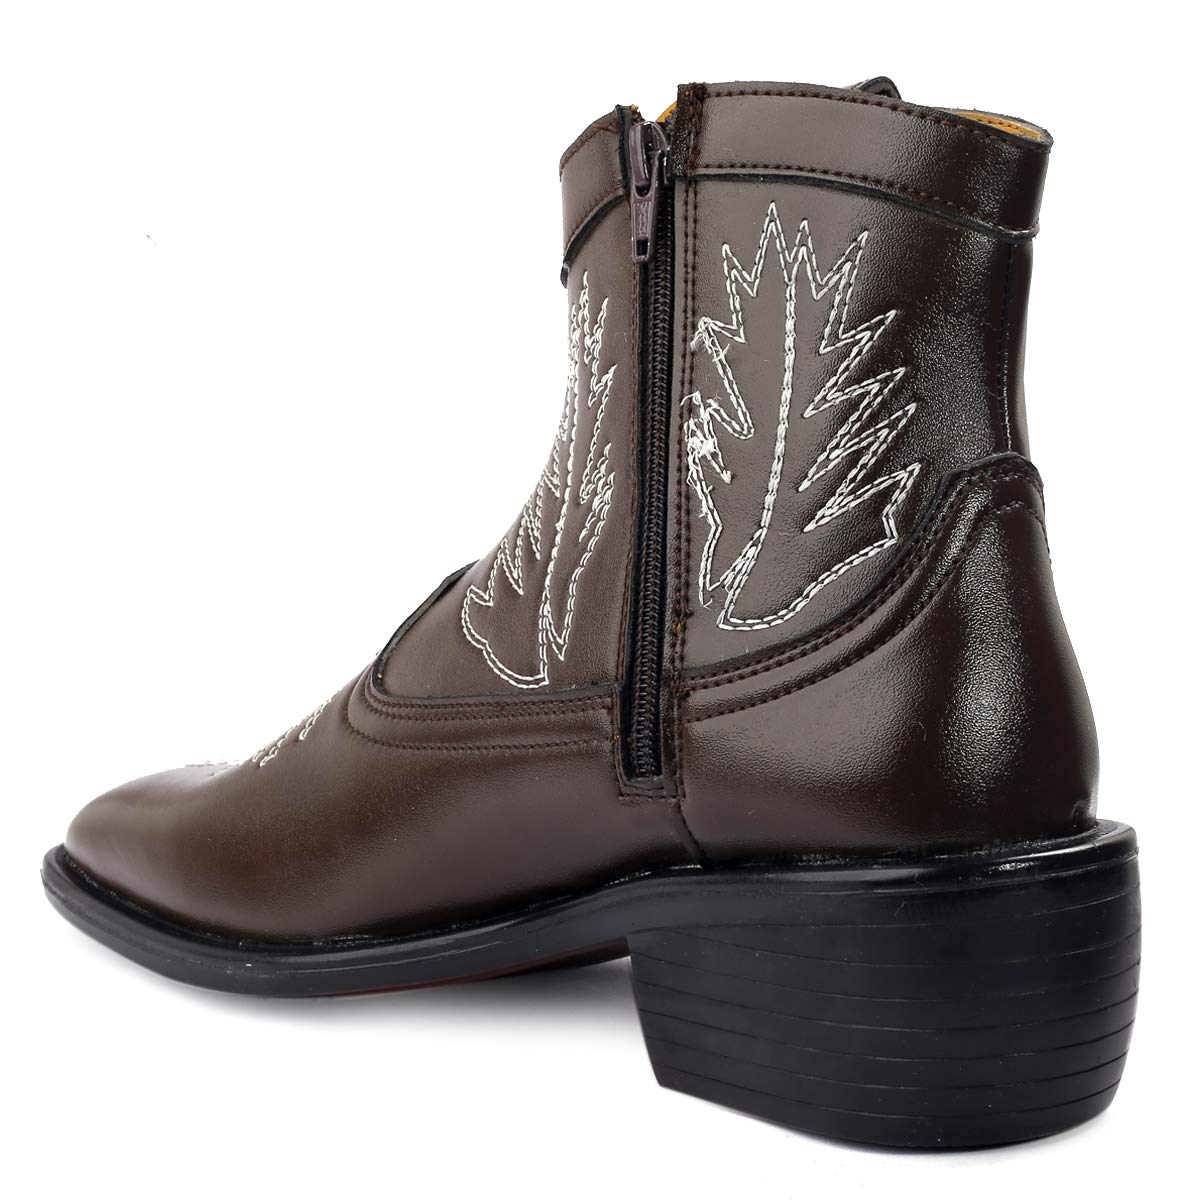 Stylish High Ankle Brown Casual And Formal Boot With Leaf Pattern-JonasParamount